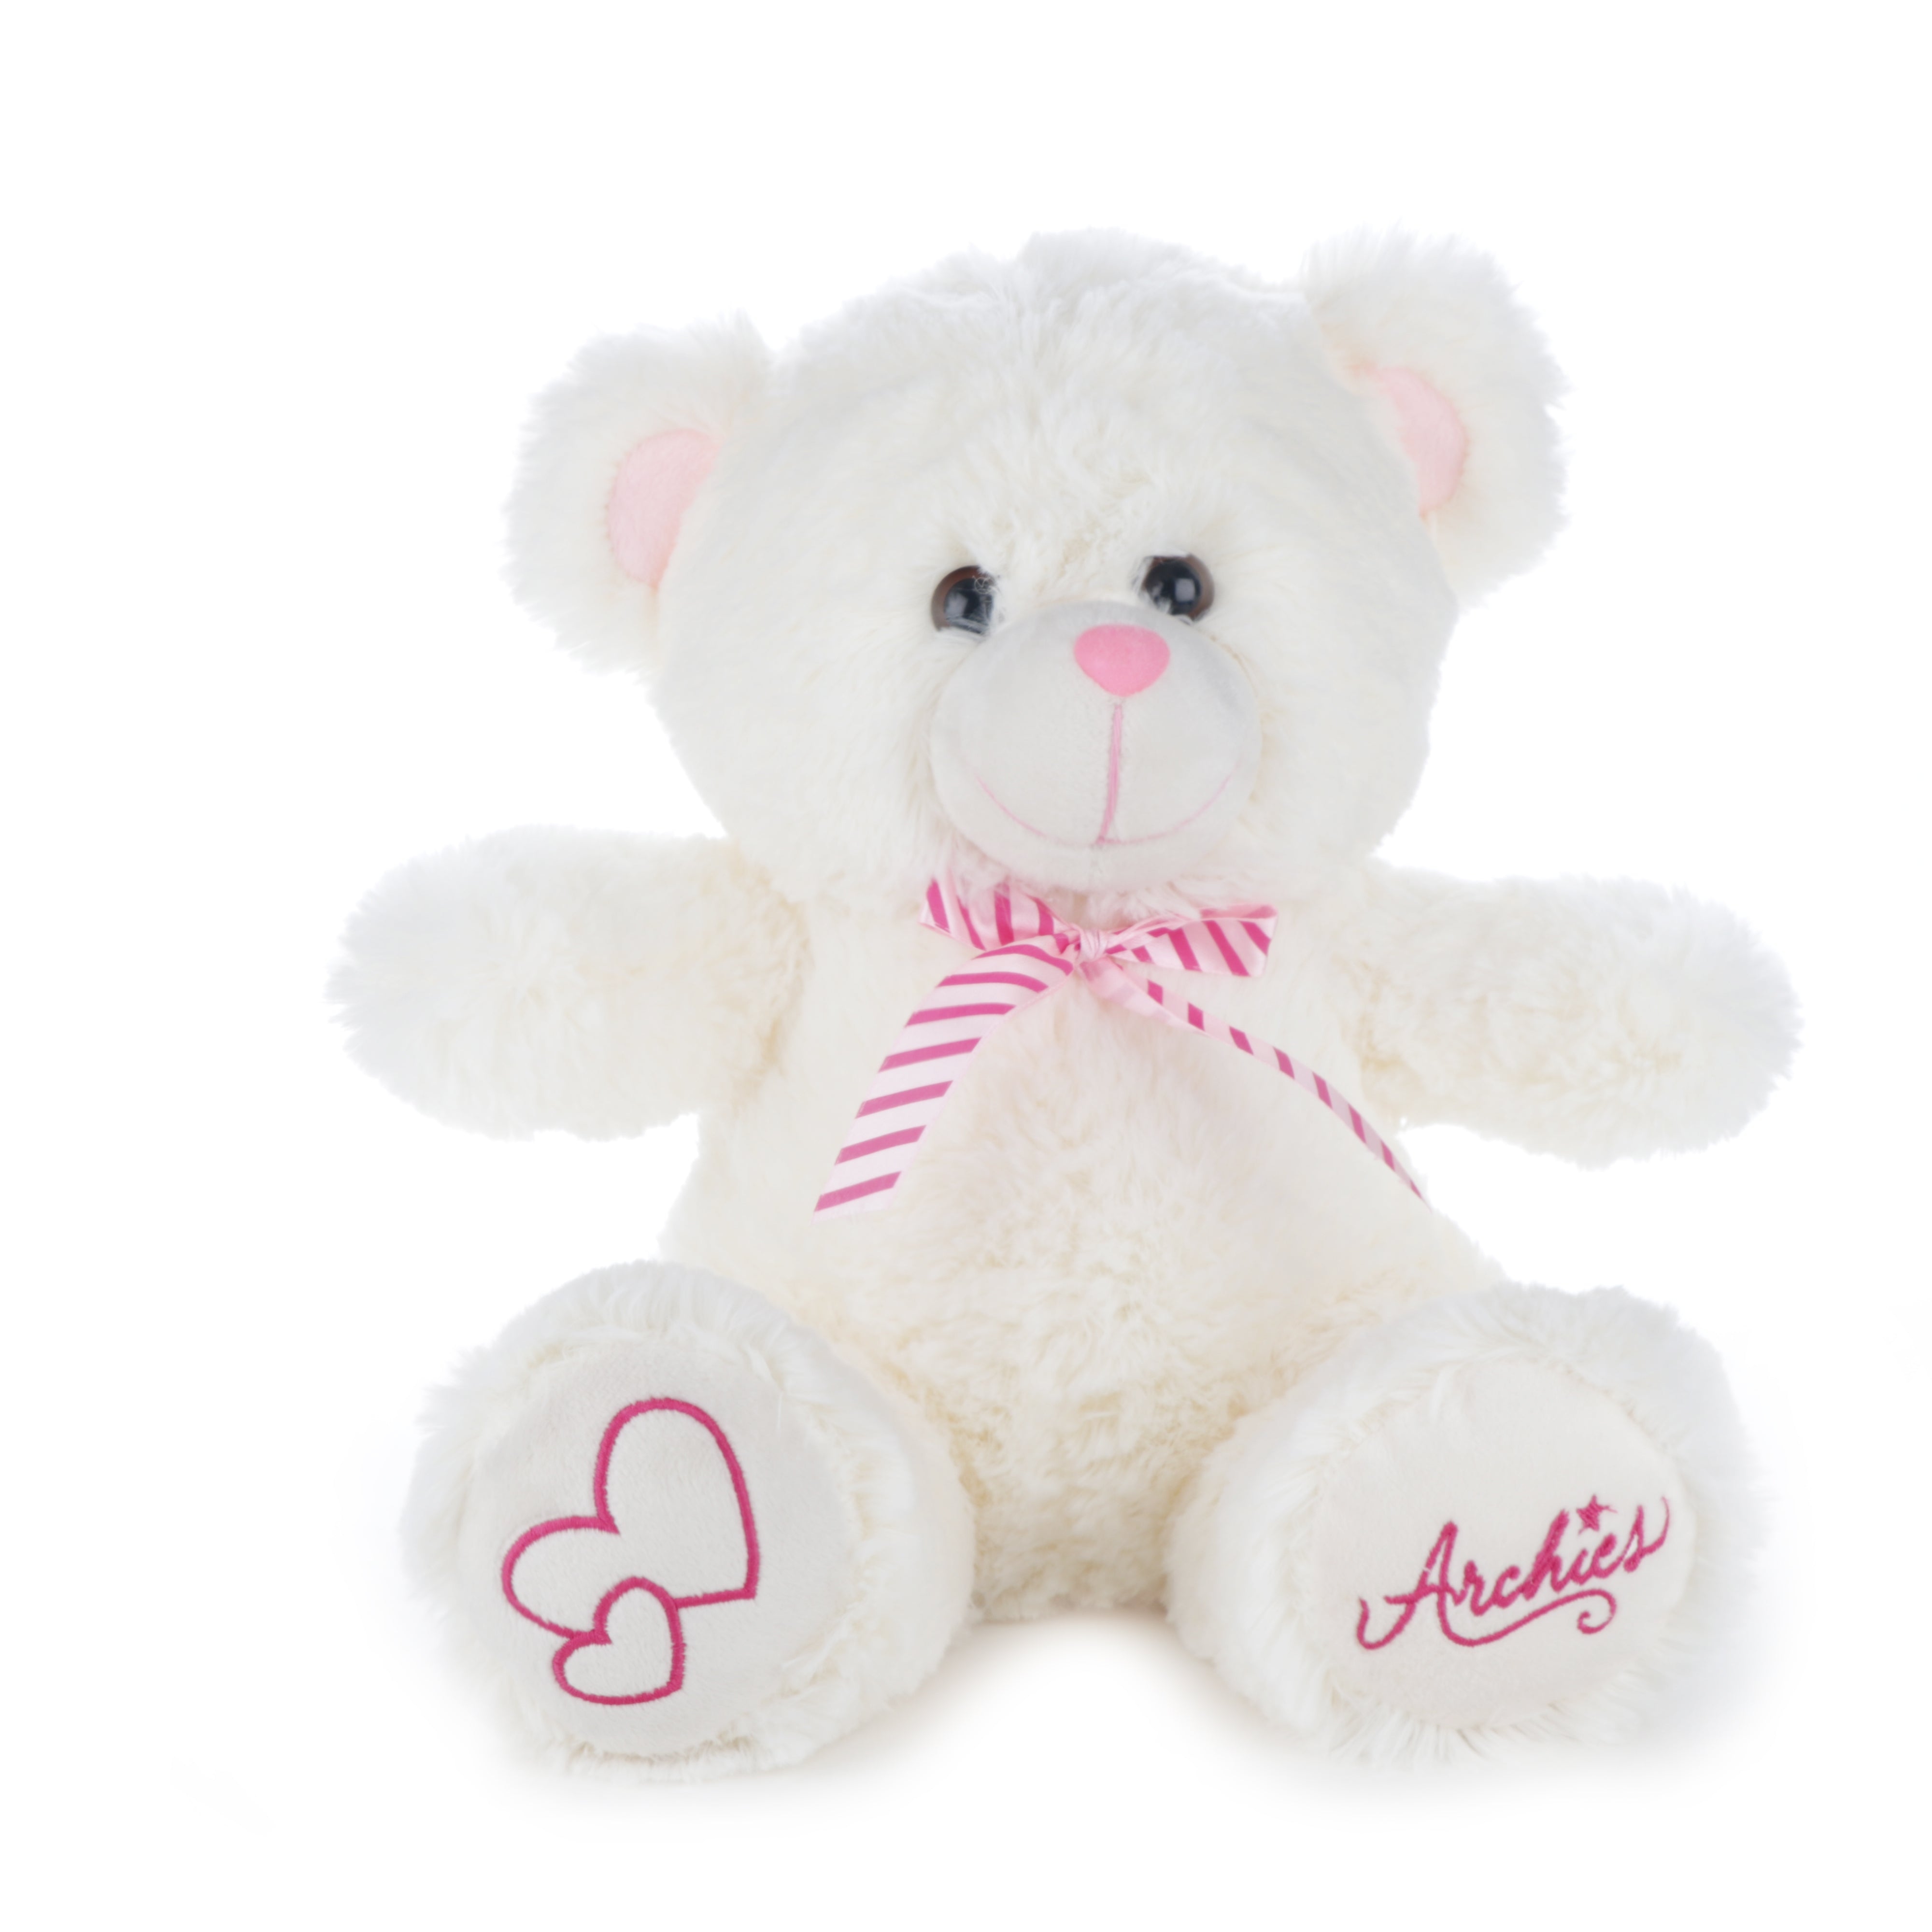 Archies | Archies Soft Toys  Teddy, Soft Toys, Teddy Bear For Girls, Soft Toys For Kids, Birthday Gift For Girls,Wife, Boyfriend, Husband White Bear with Pink Bow